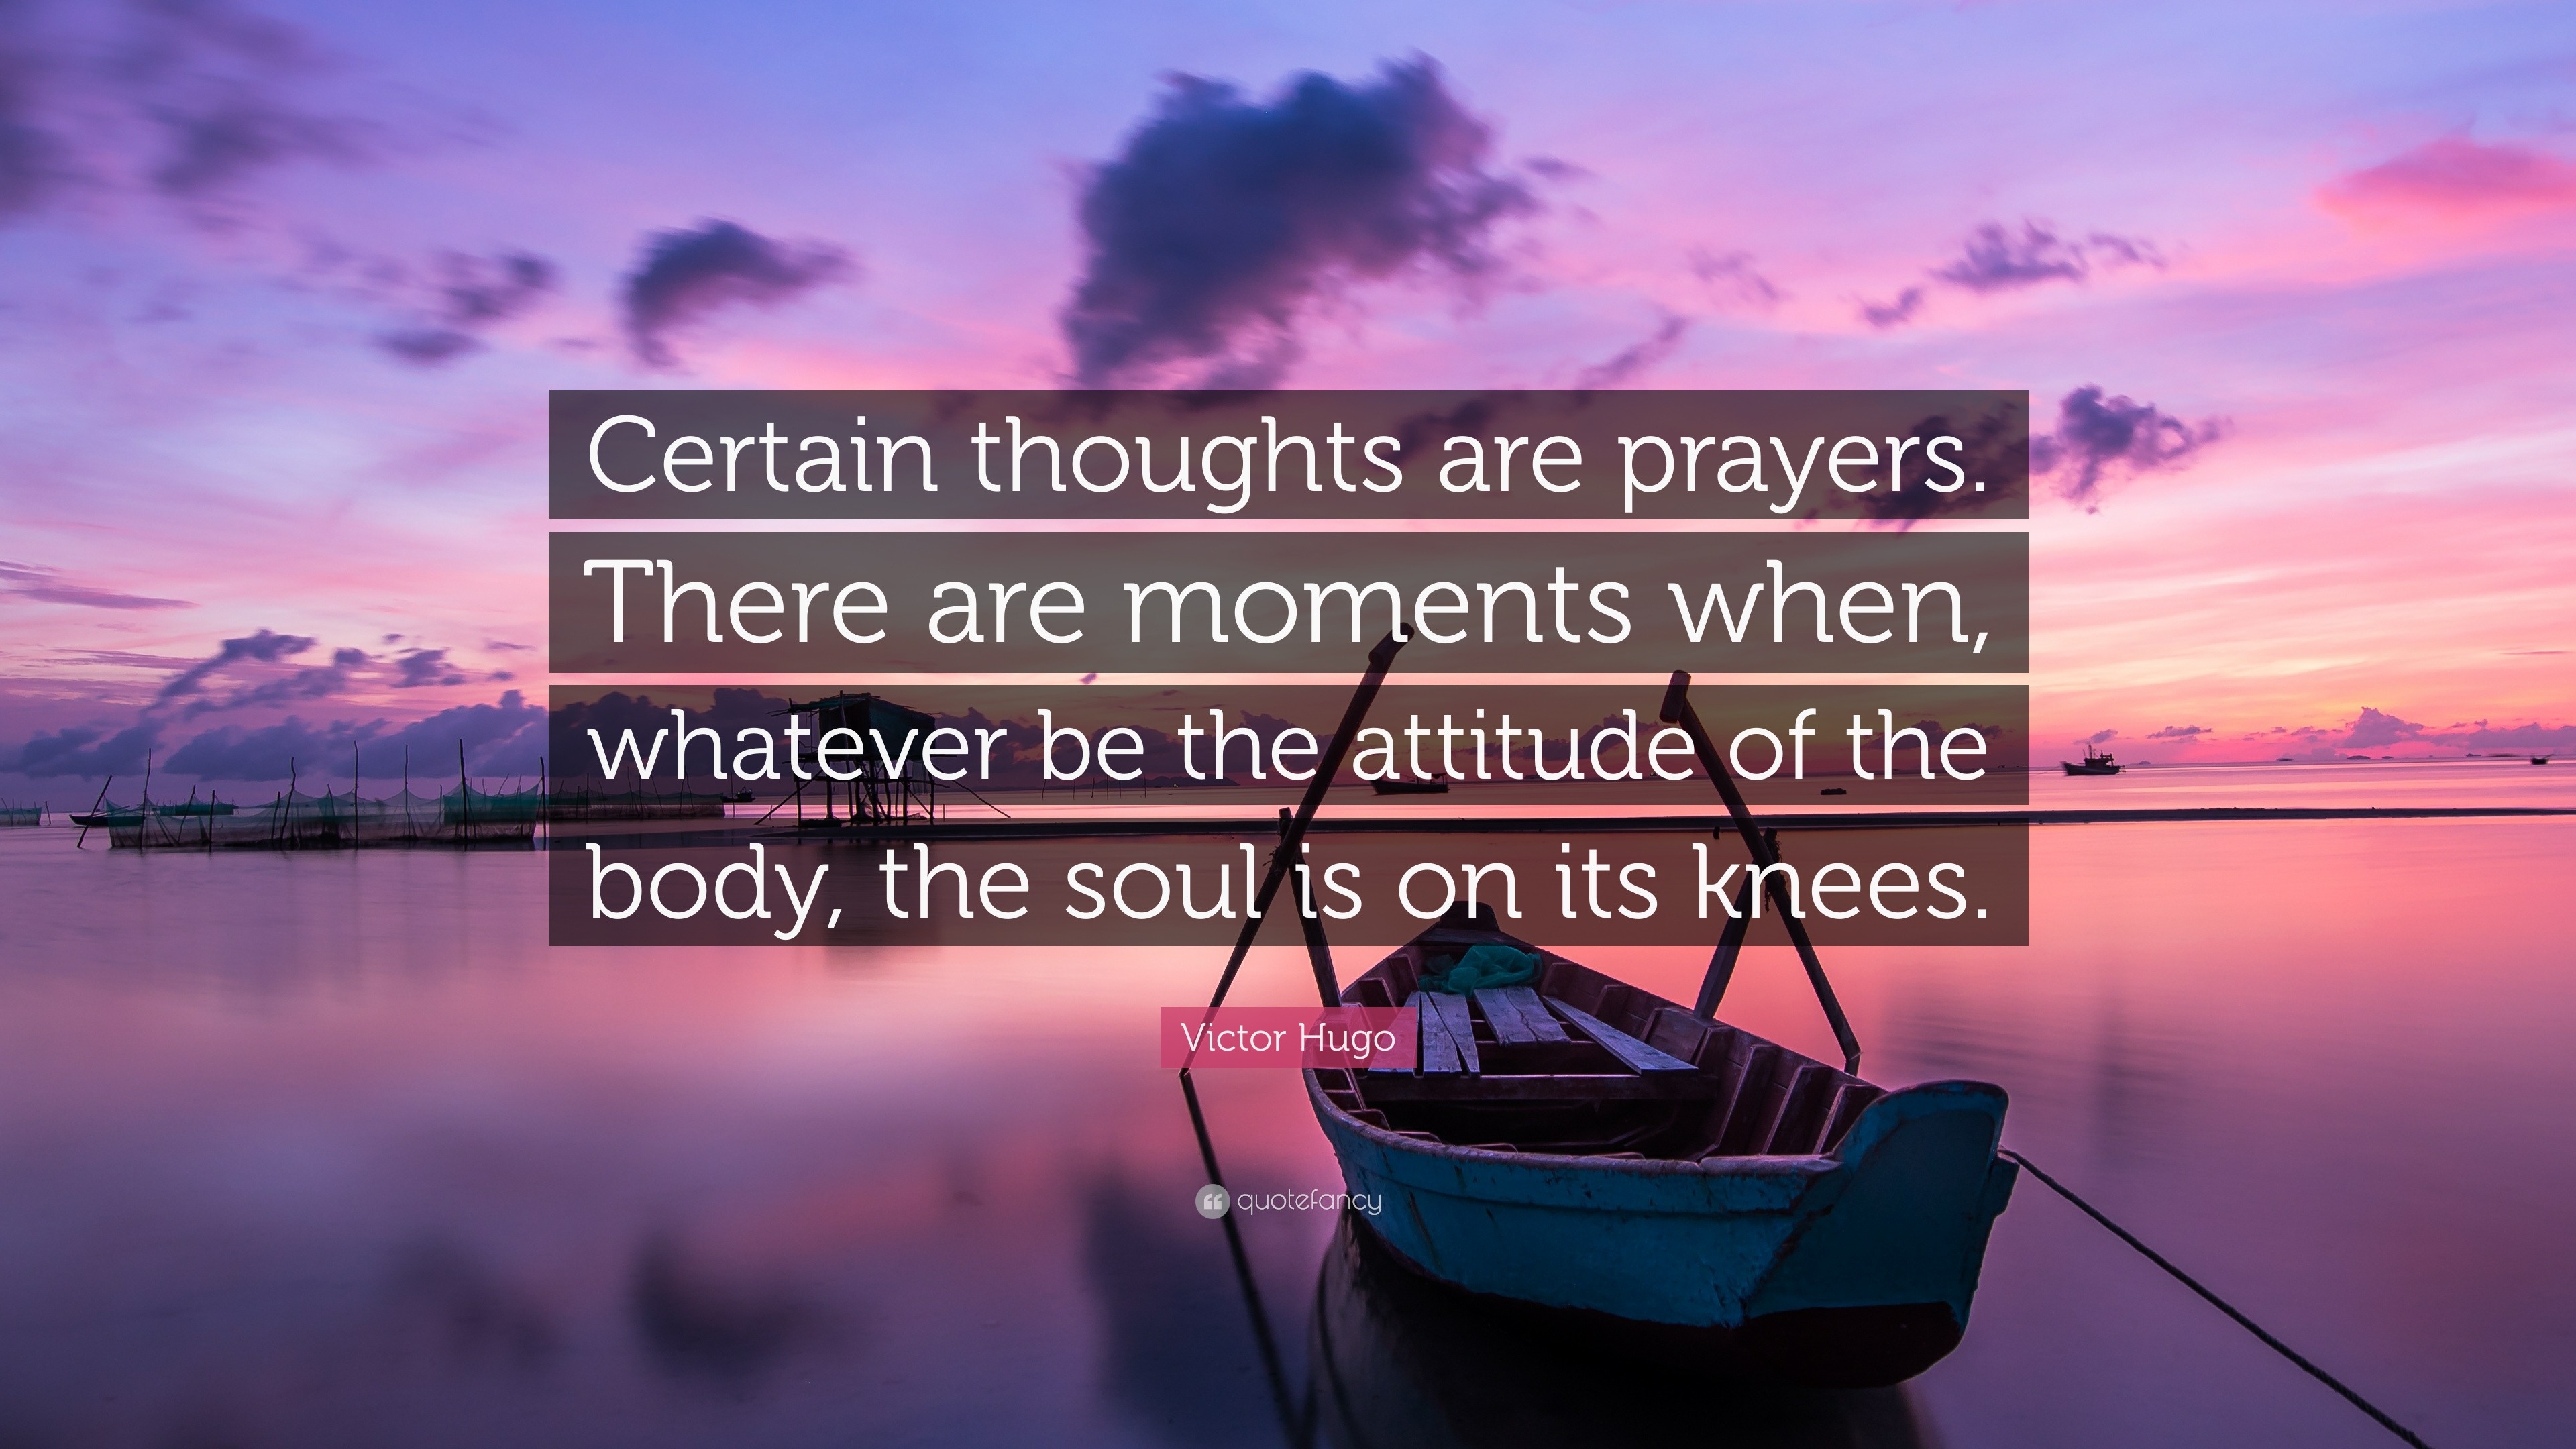 Victor Hugo Quote: “Certain thoughts are prayers. There are moments